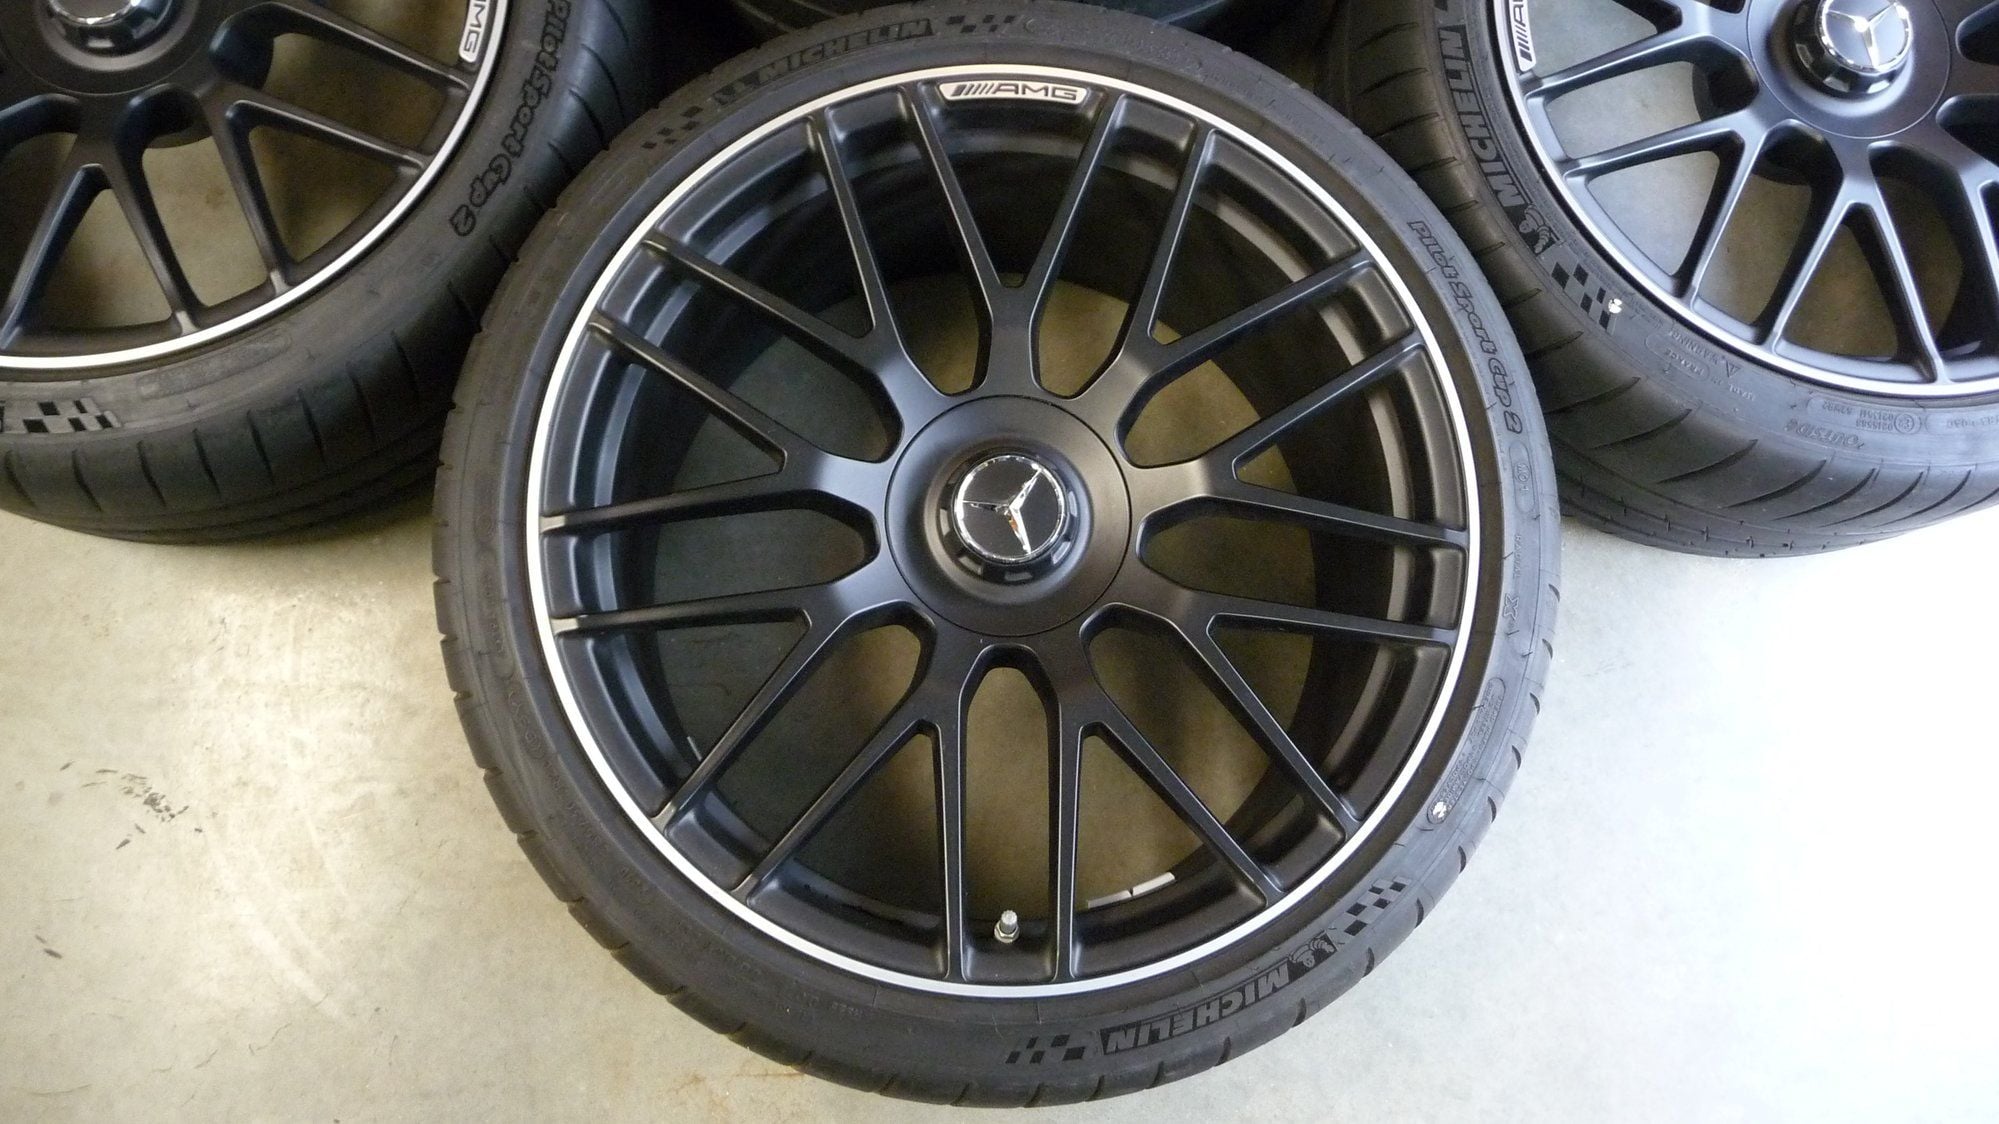 Wheels and Tires/Axles - WTB: 20-inch AMG forged cross-spoke wheels - Used....